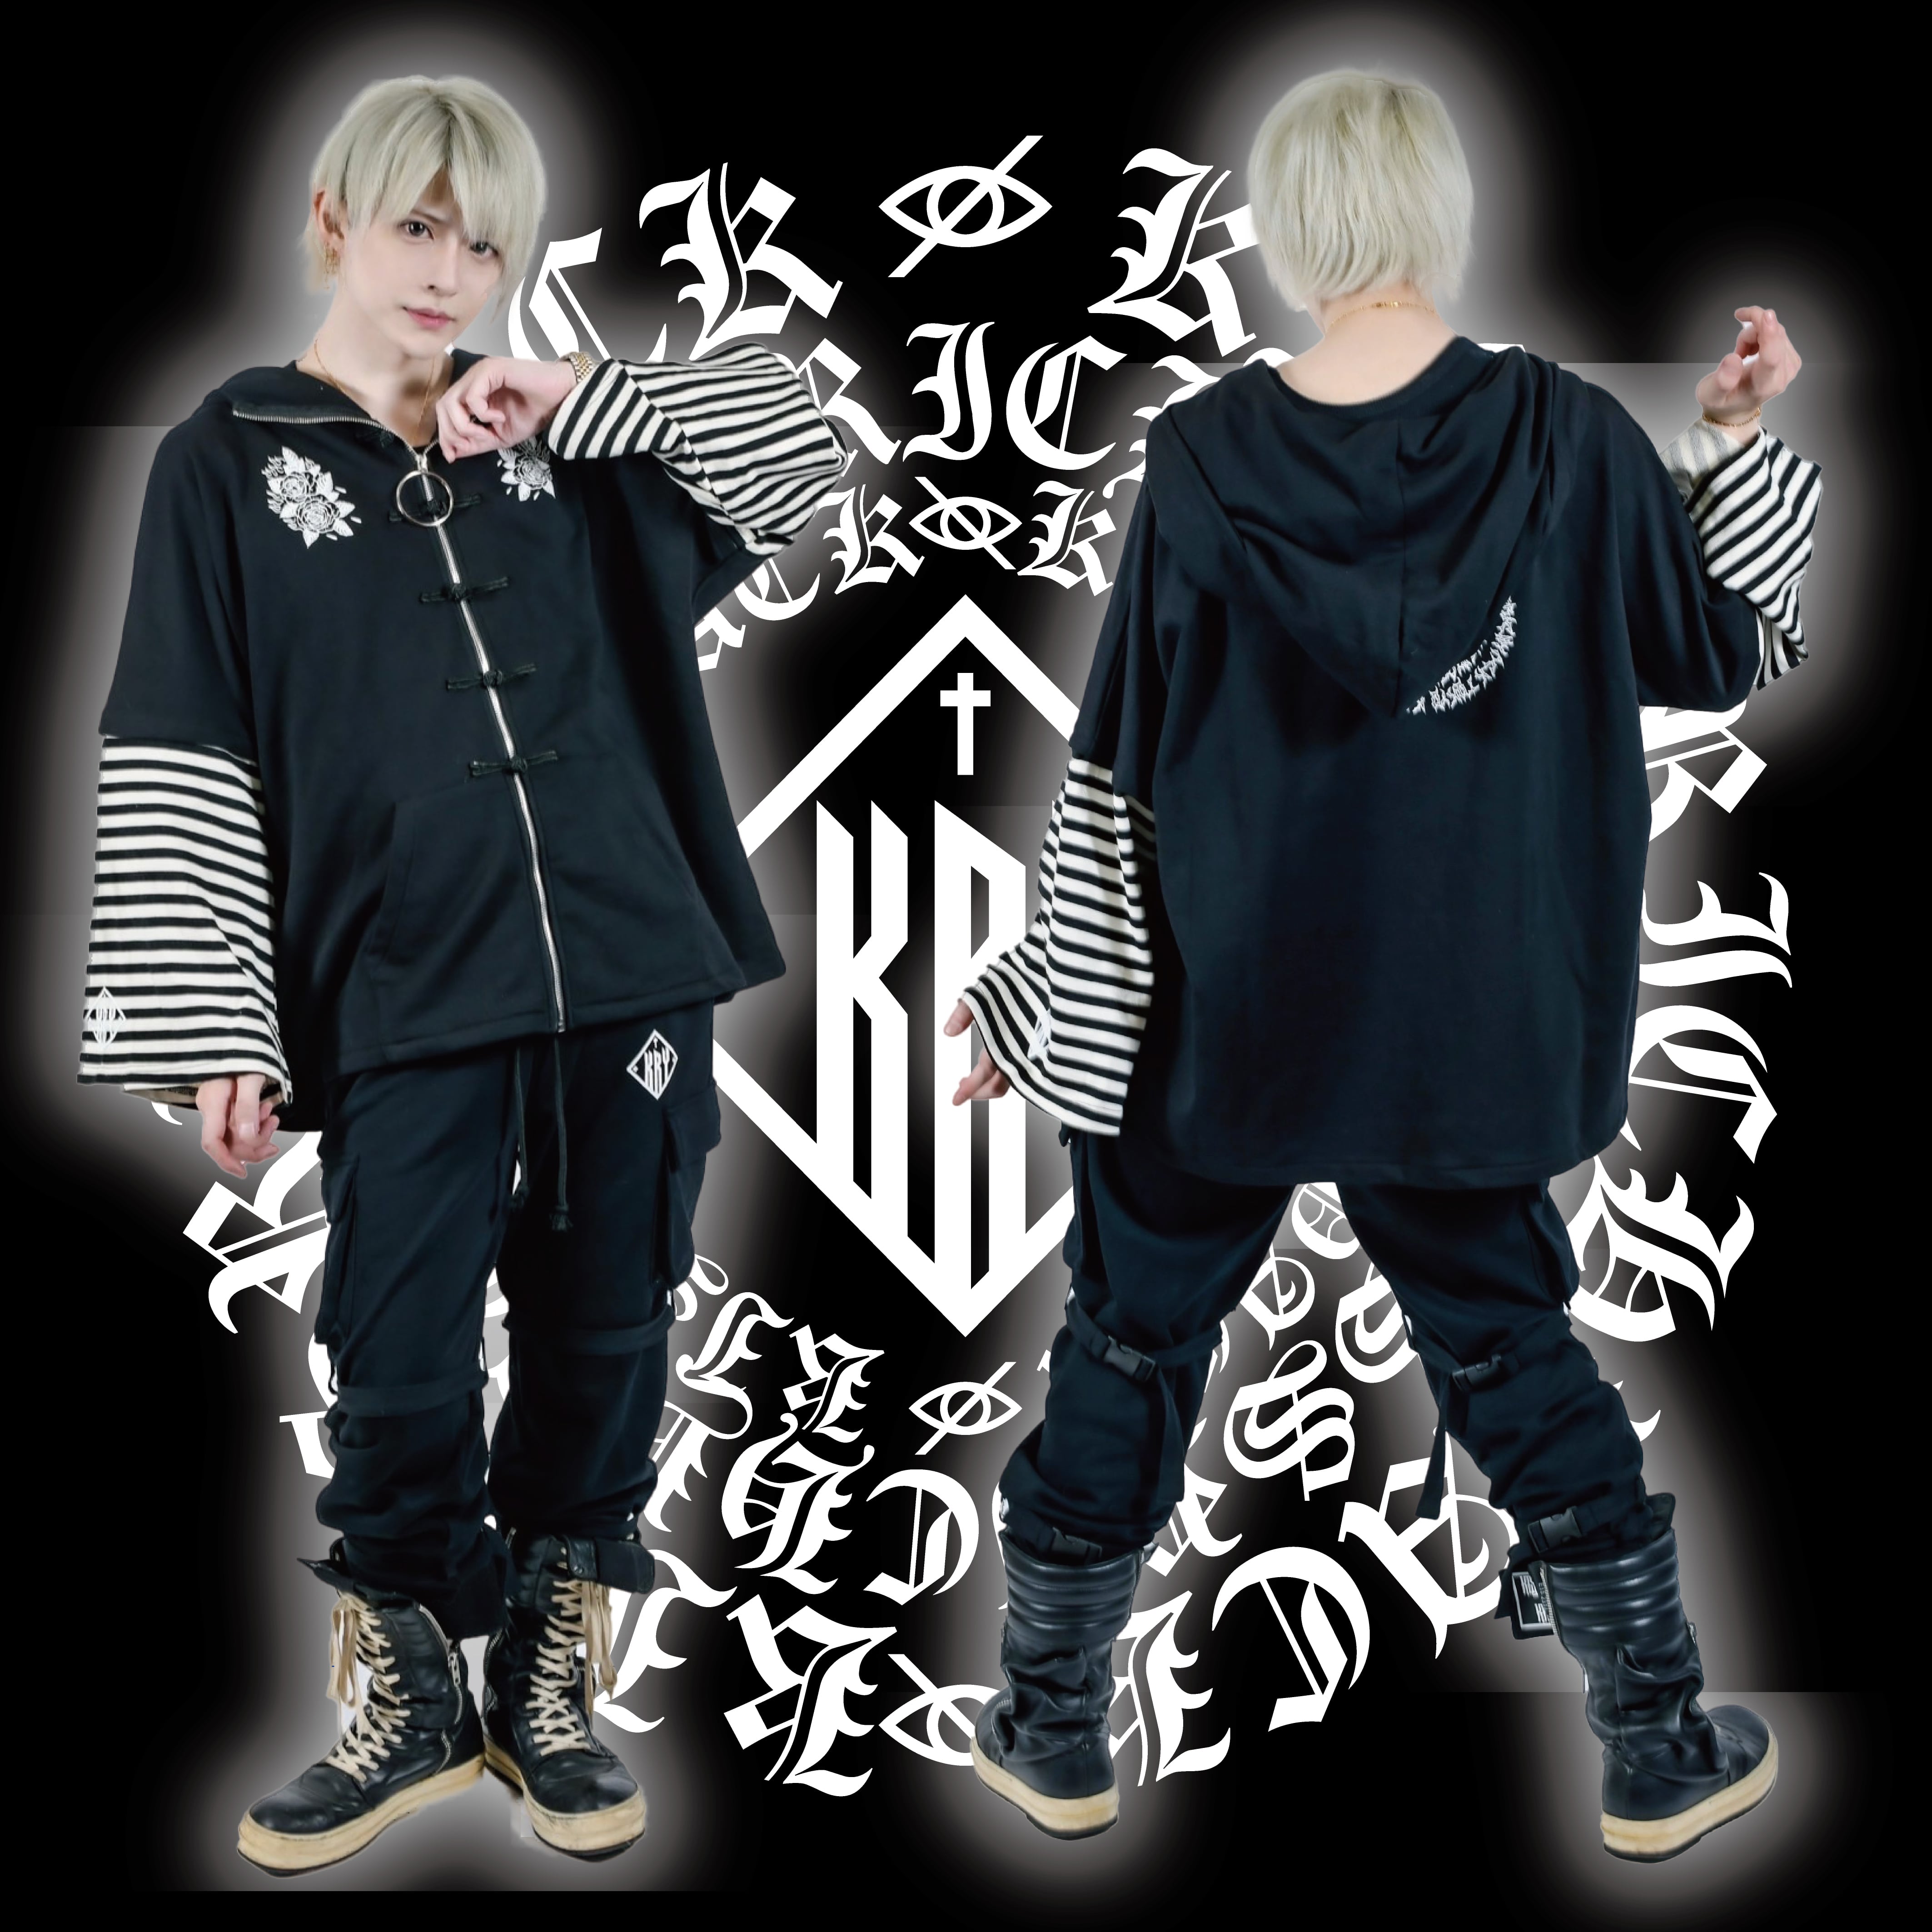 「RIP」 | KRY clothing powered by BASE